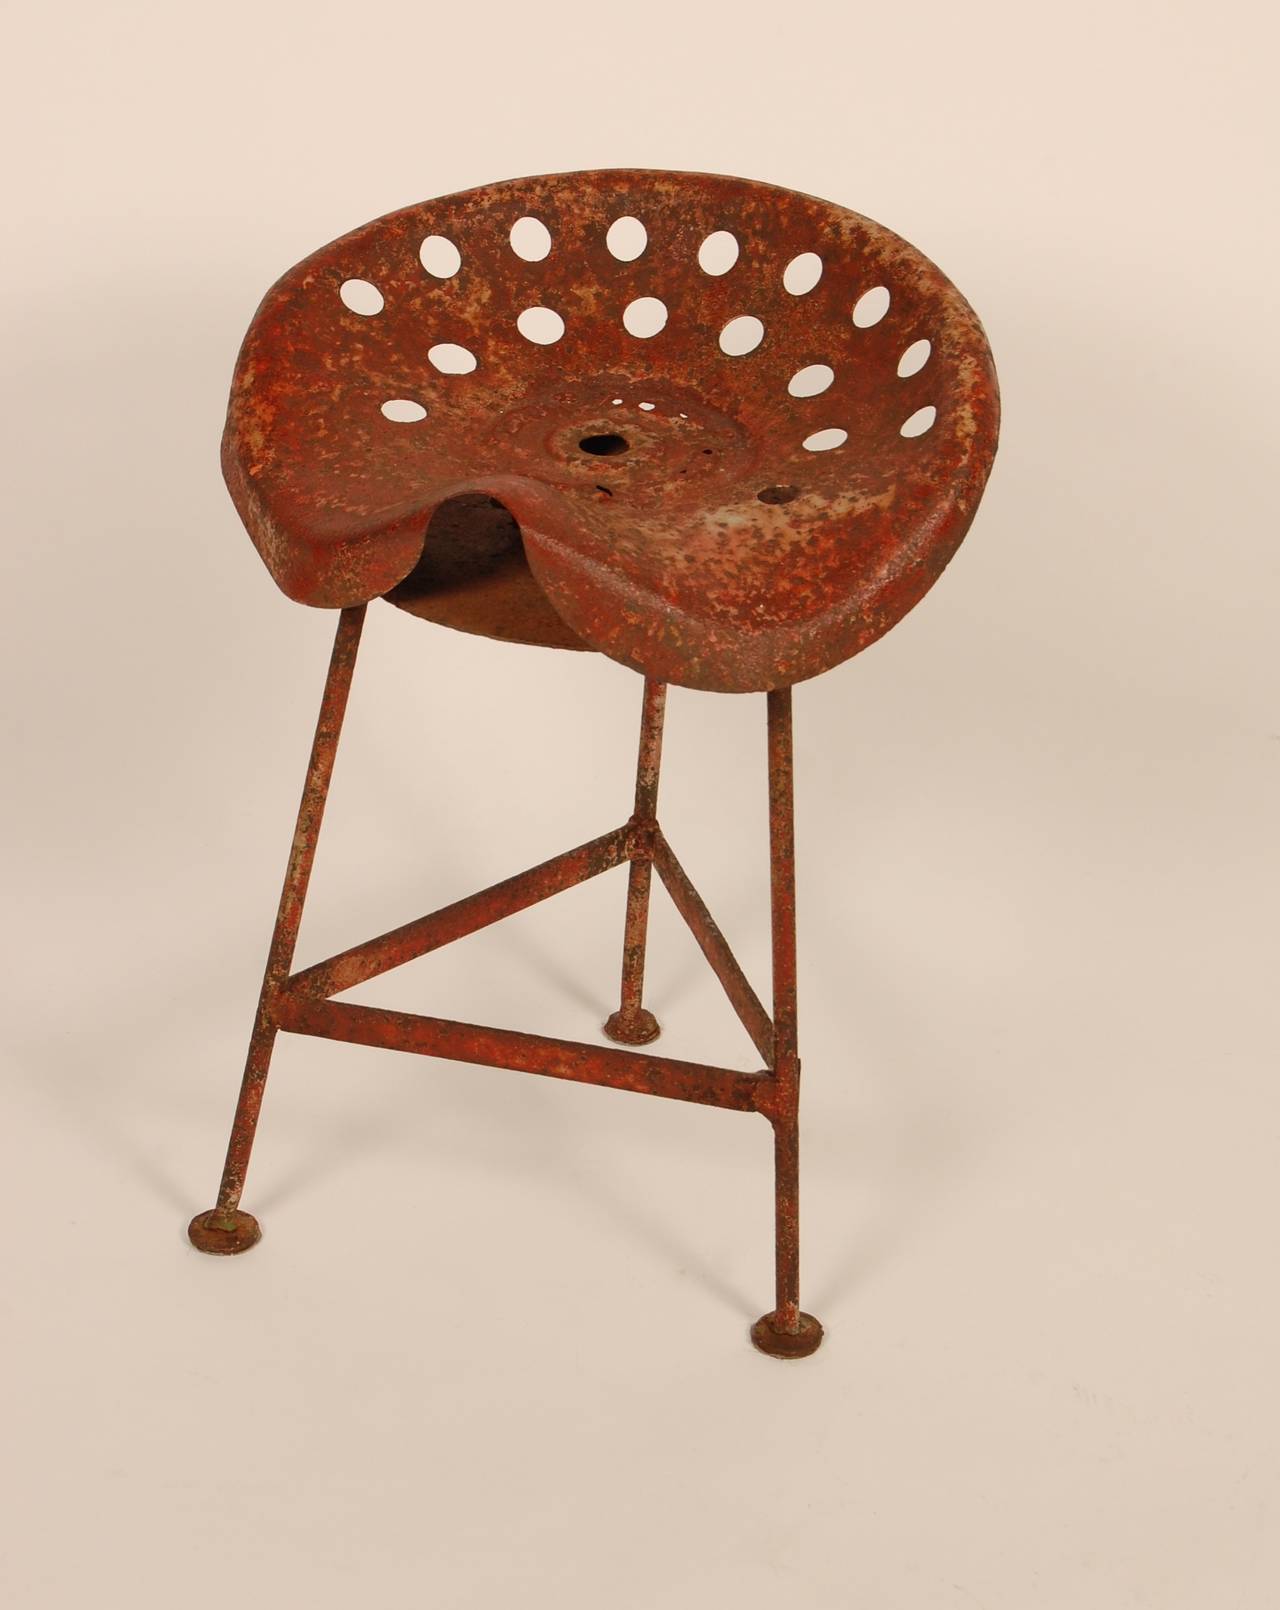 Industrial Rustic Tractor Seat Stool